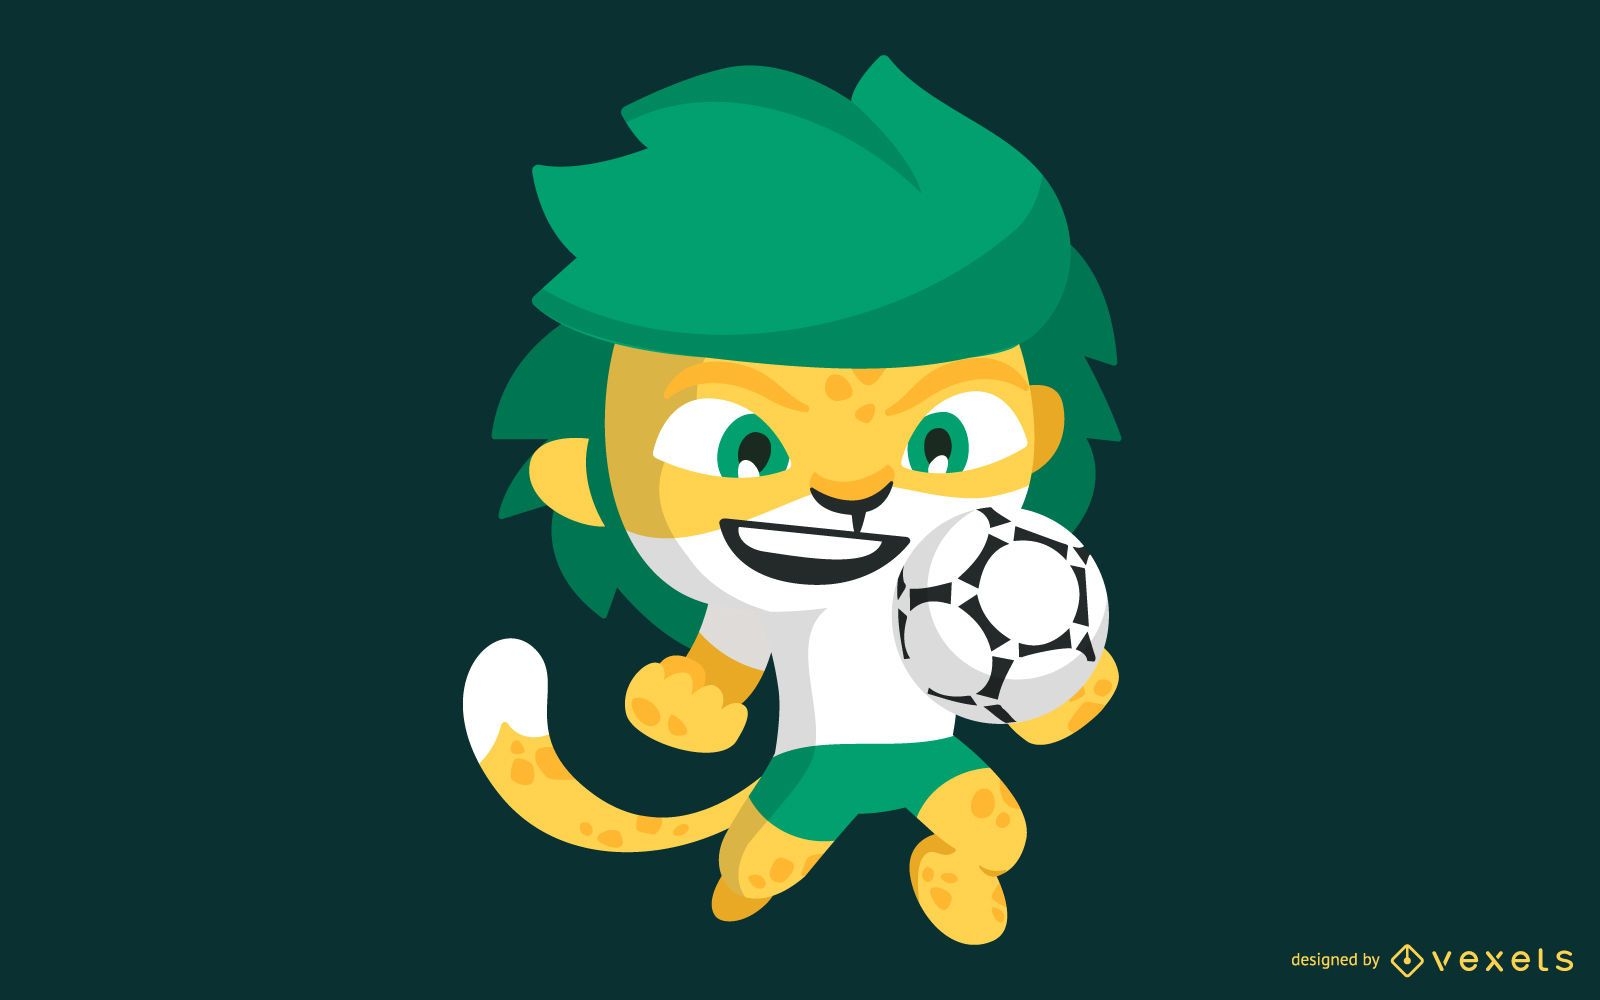 South Africa 2010 World Cup Mascot Vector